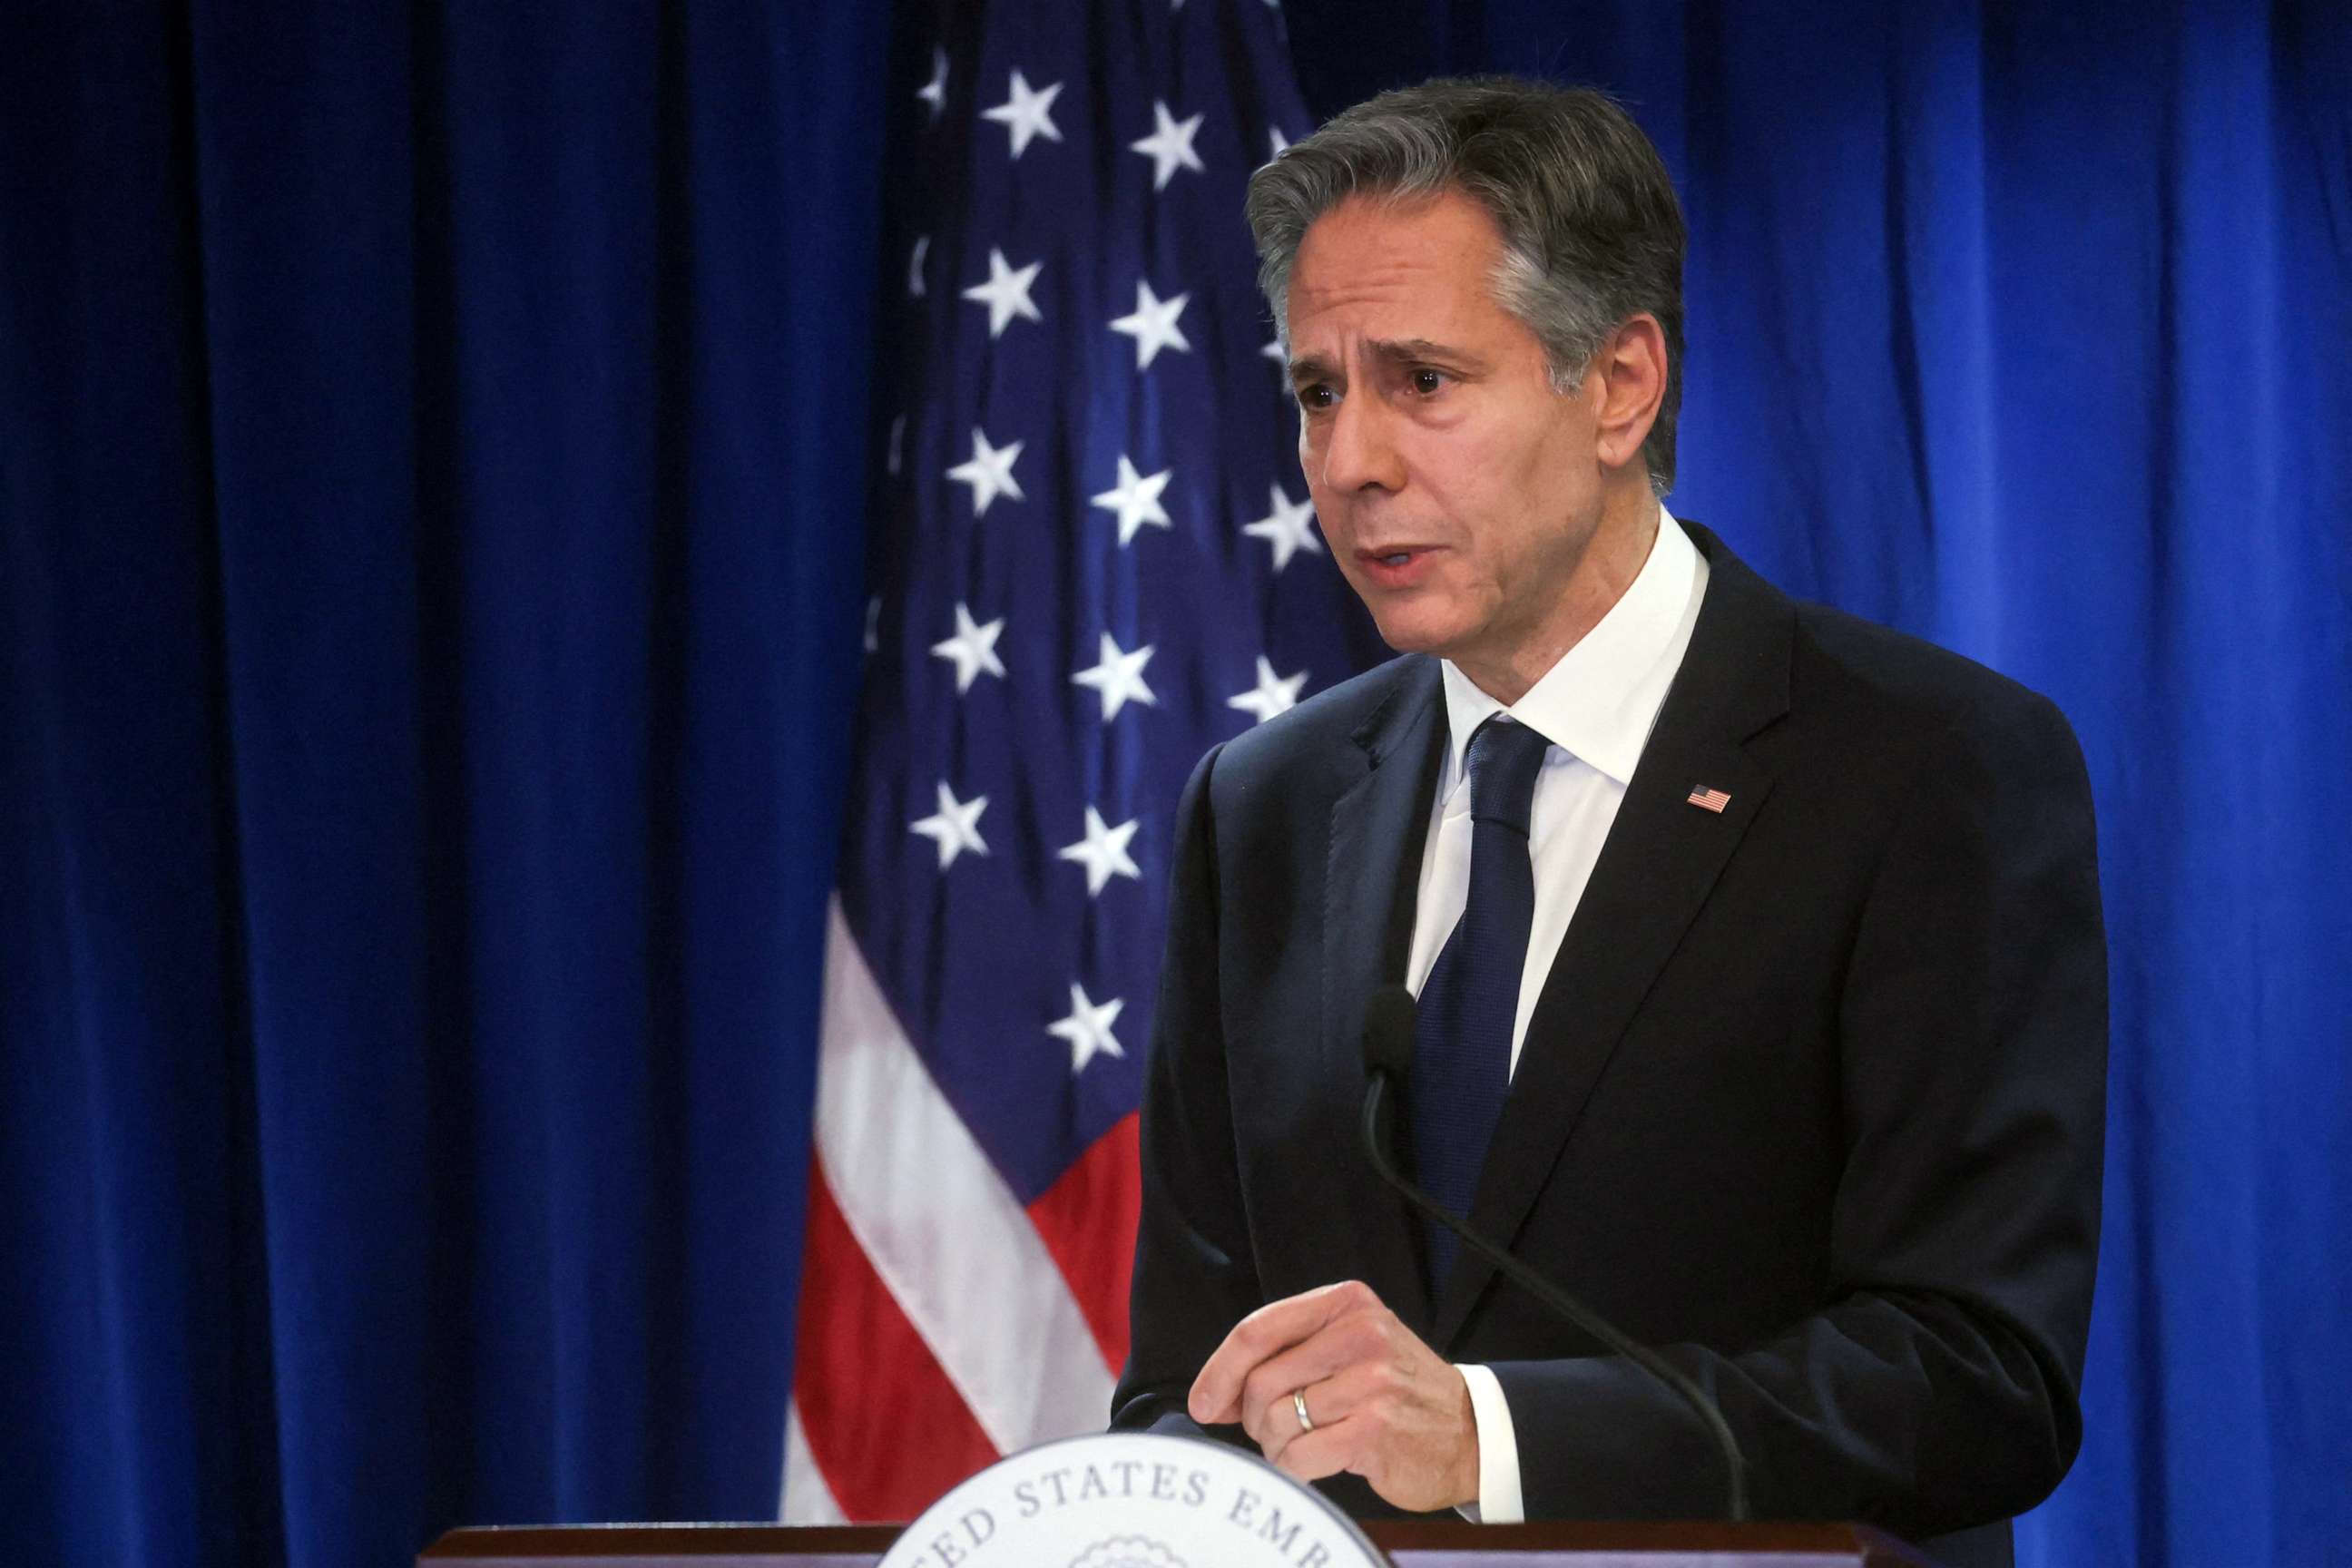 PHOTO: U.S. Secretary of State Antony Blinken speaks during a press conference at the Beijing American Center of the US Embassy in Beijing on June 19, 2023.